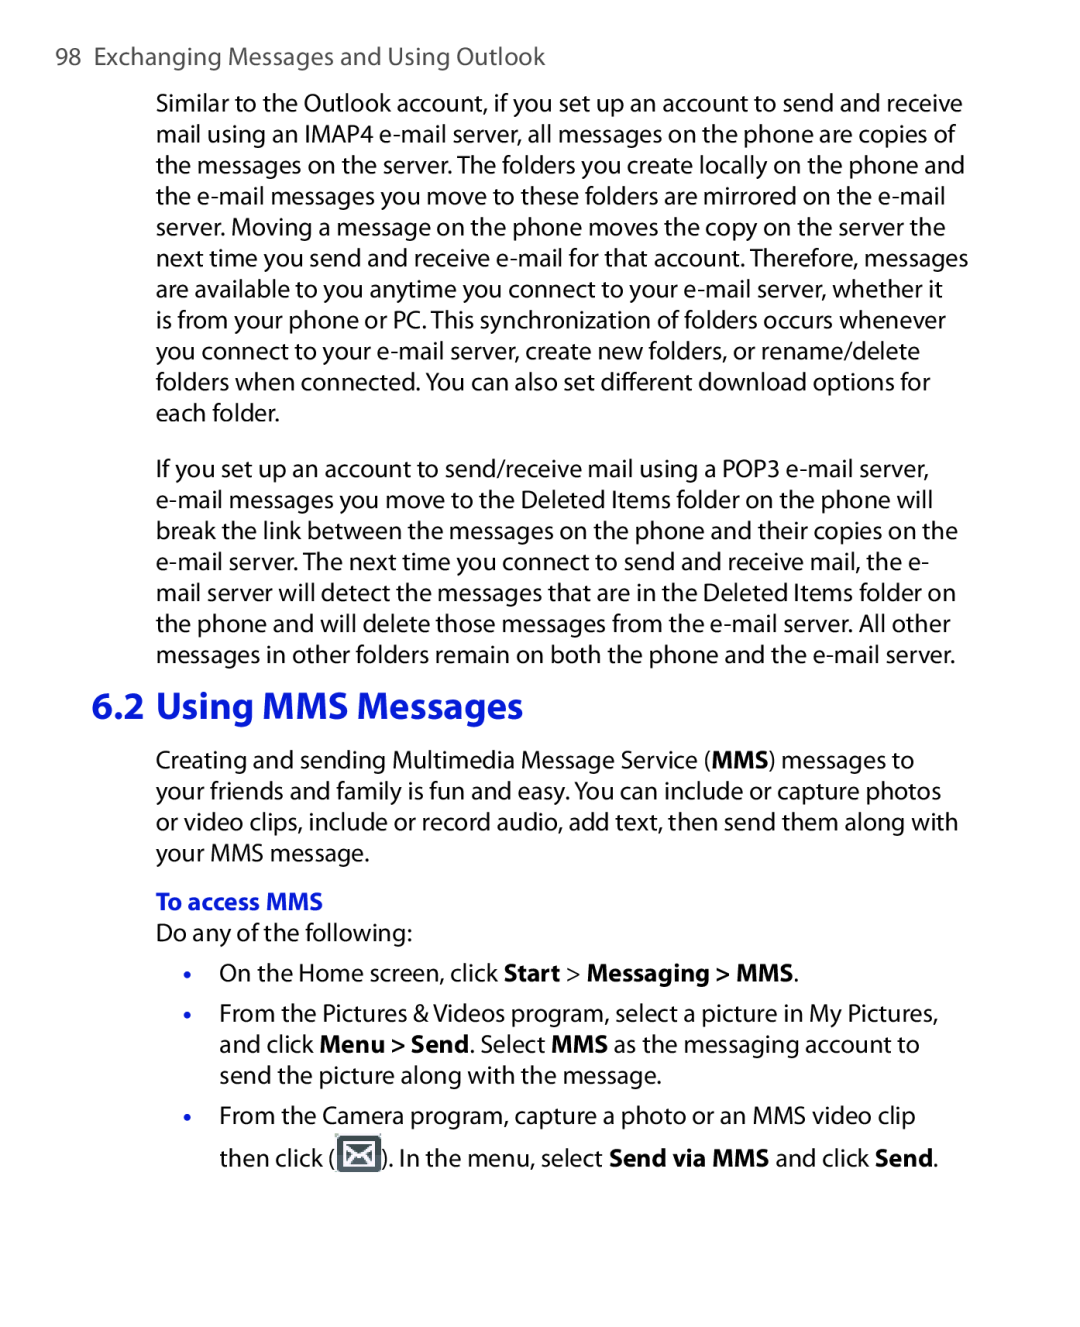 HTC HTC S621 user manual Using MMS Messages, Exchanging Messages and Using Outlook, To access MMS 